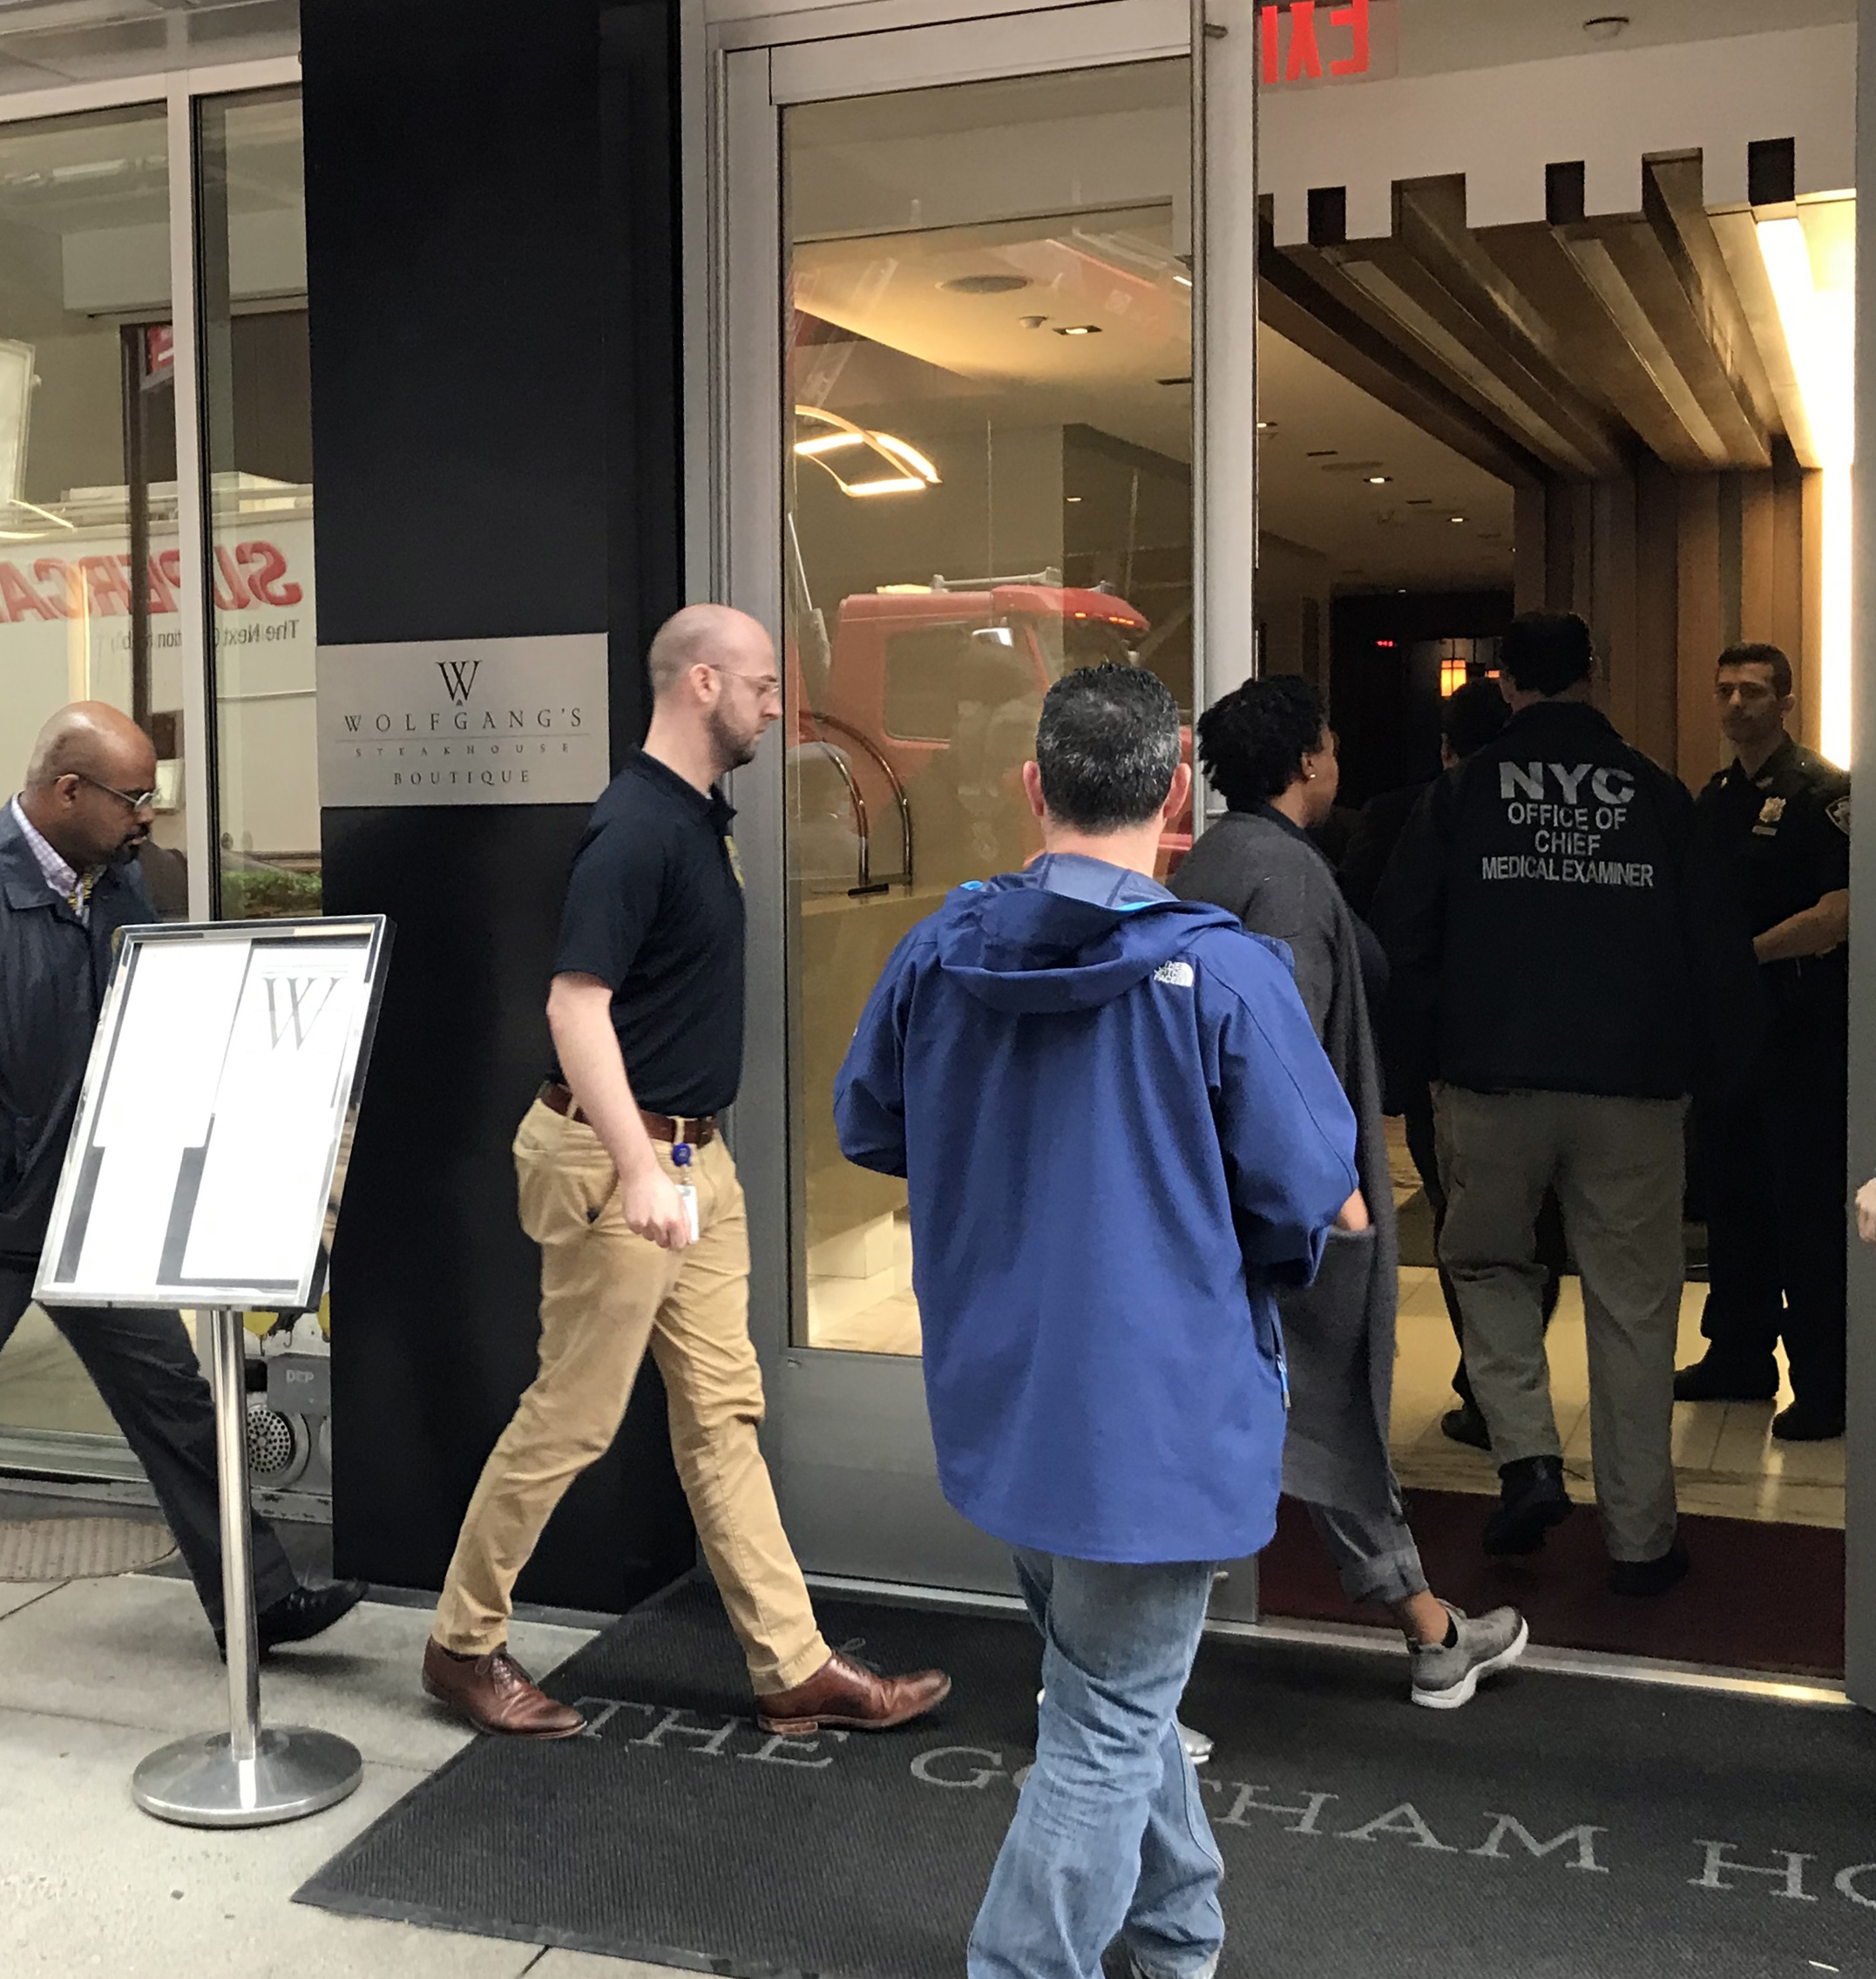 PHOTO: Authorities from the New York City Office of the Chief Medical Examiner enter the Gotham Hotel in New York after reports that a woman jumped from the building with a child on May 18, 2018.